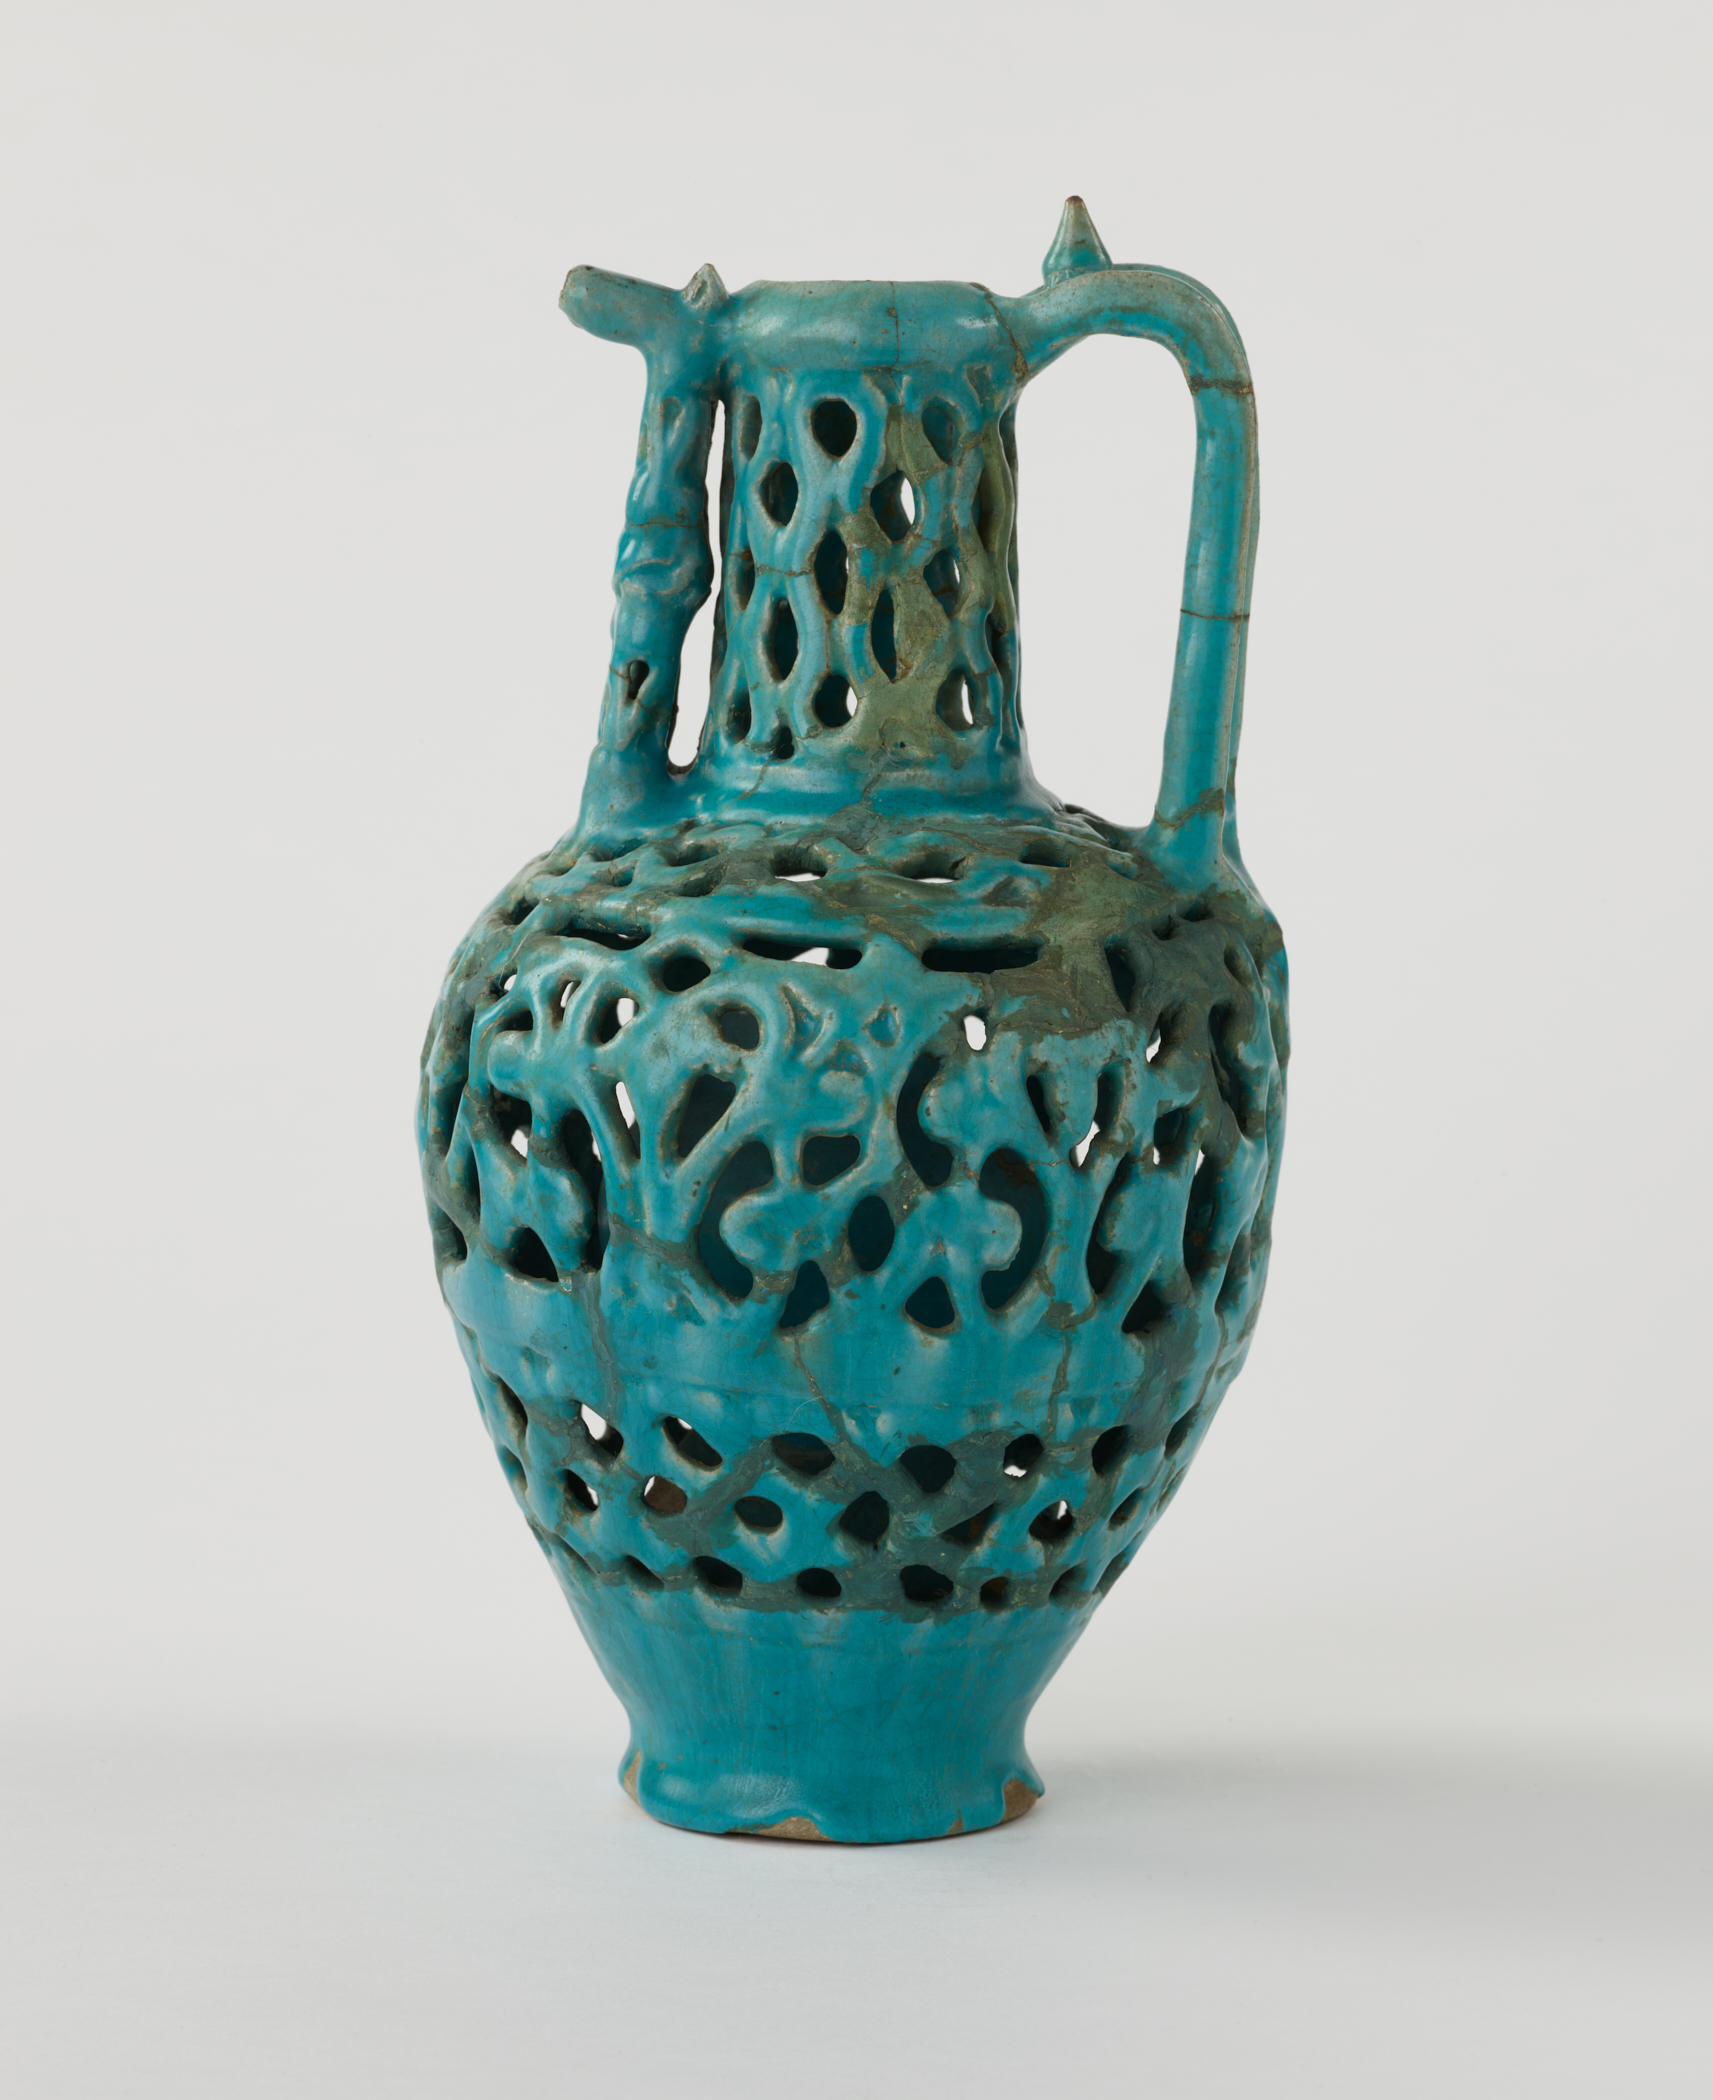 /A%20turquoise%20earthenware%20ewer%20with%20cut%20out%20decorations%20and%20a%20sculptural%20spout%20and%20handle.